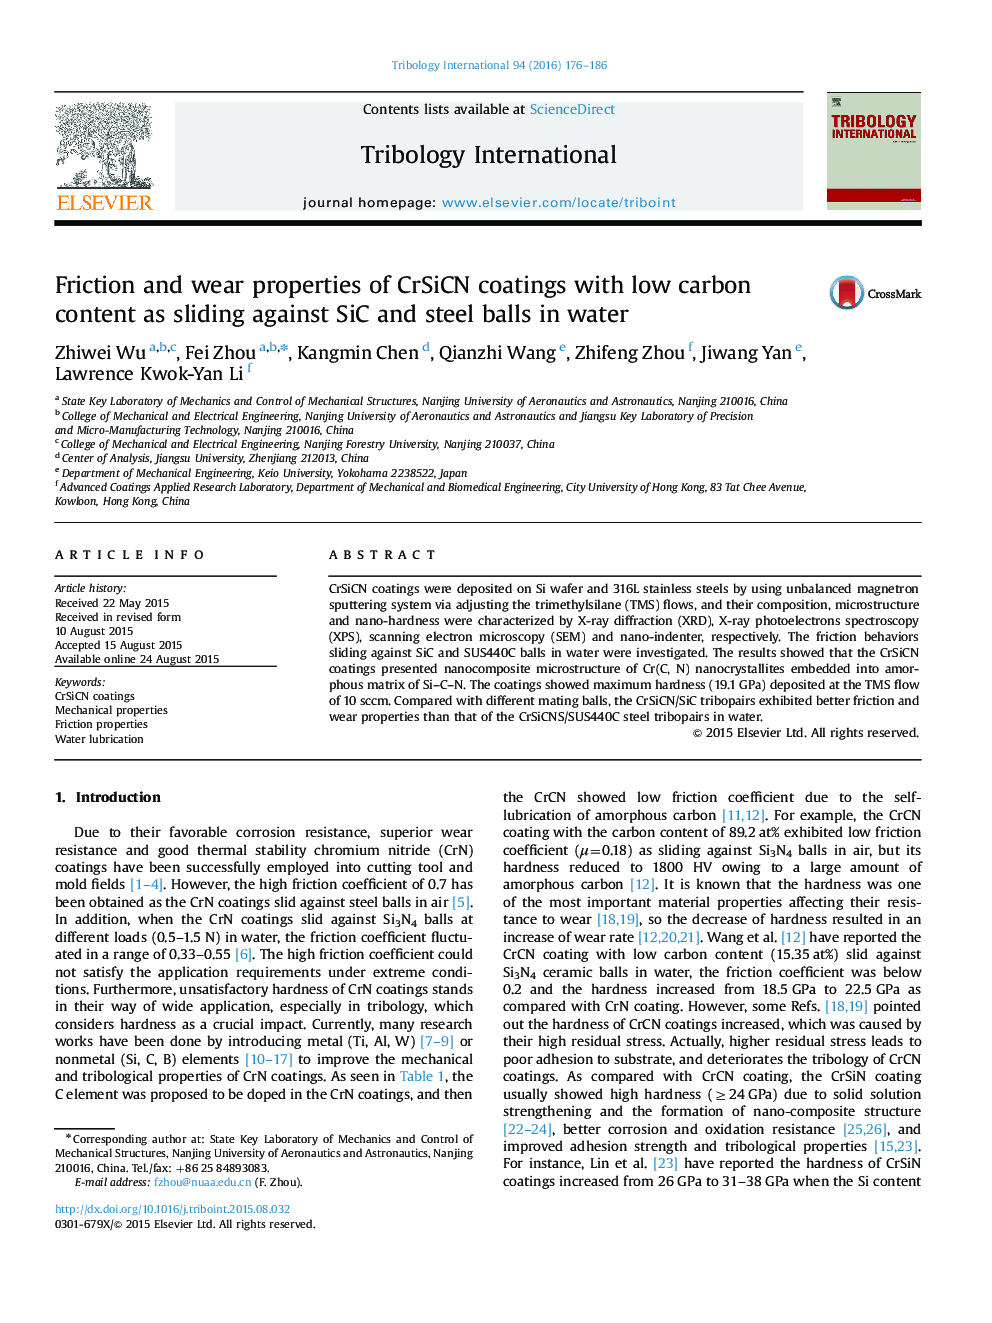 Friction and wear properties of CrSiCN coatings with low carbon content as sliding against SiC and steel balls in water